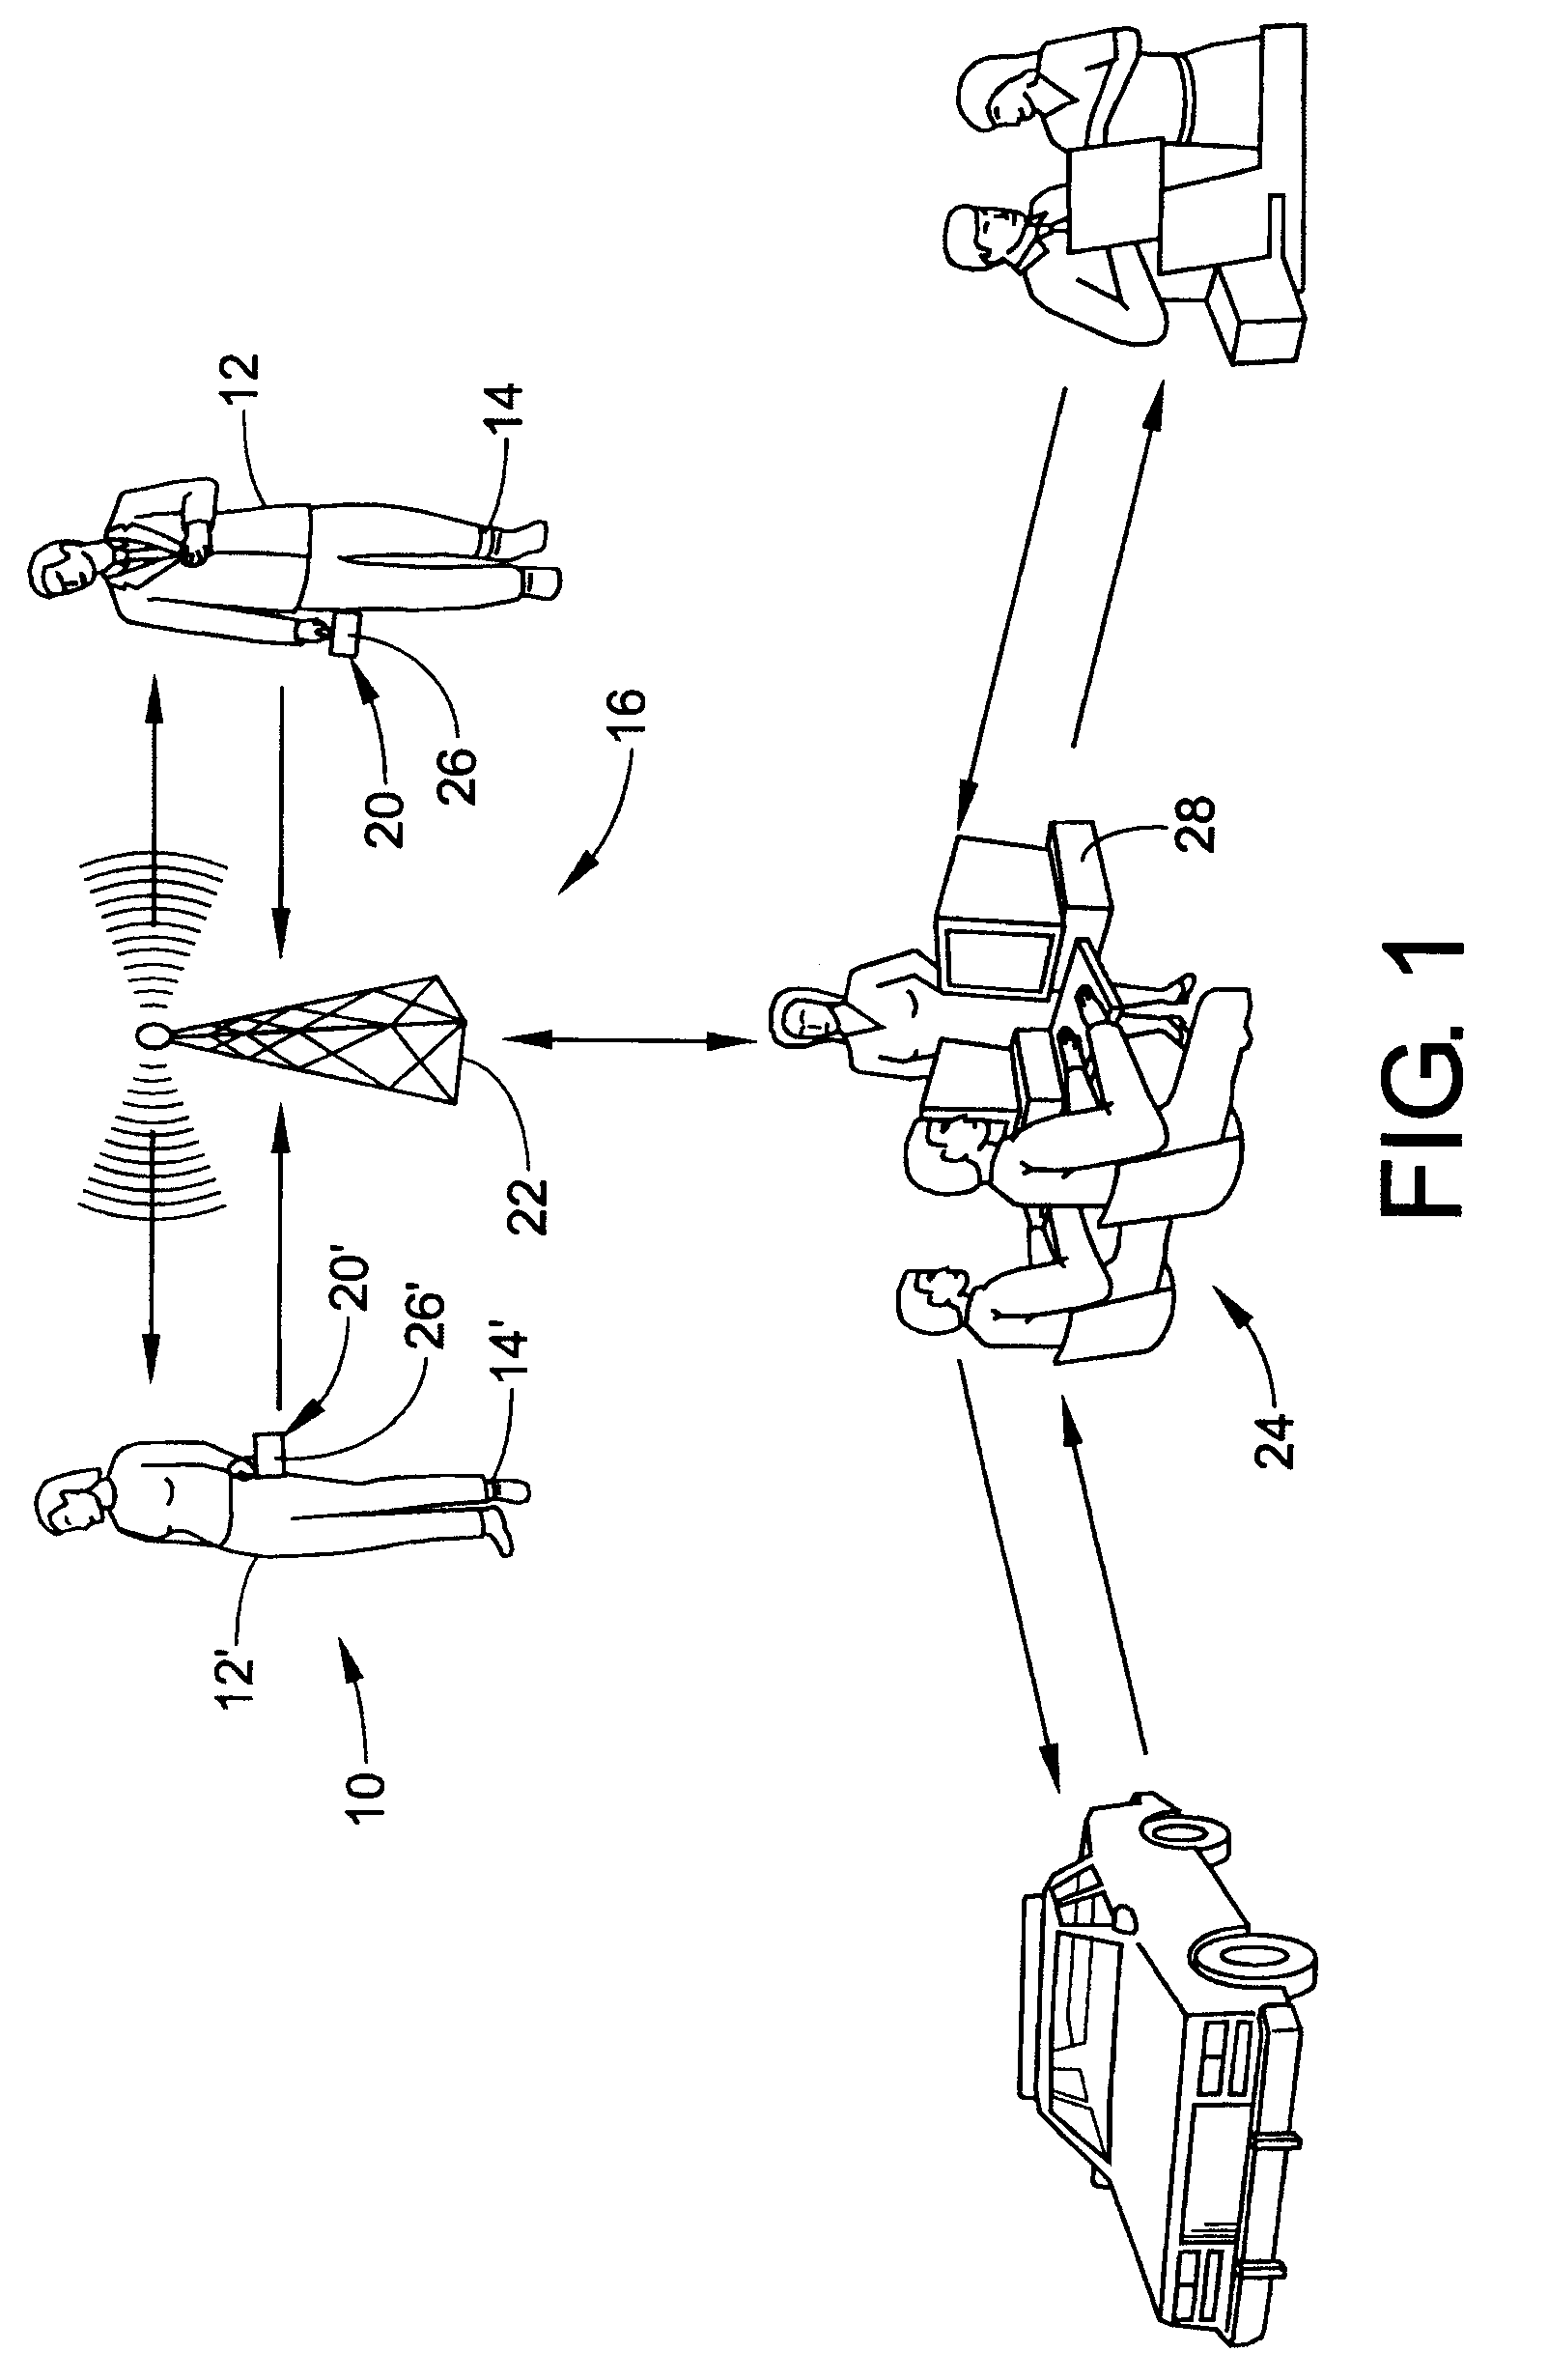 Portable monitoring apparatus with over the air programming and sampling volume collection cavity